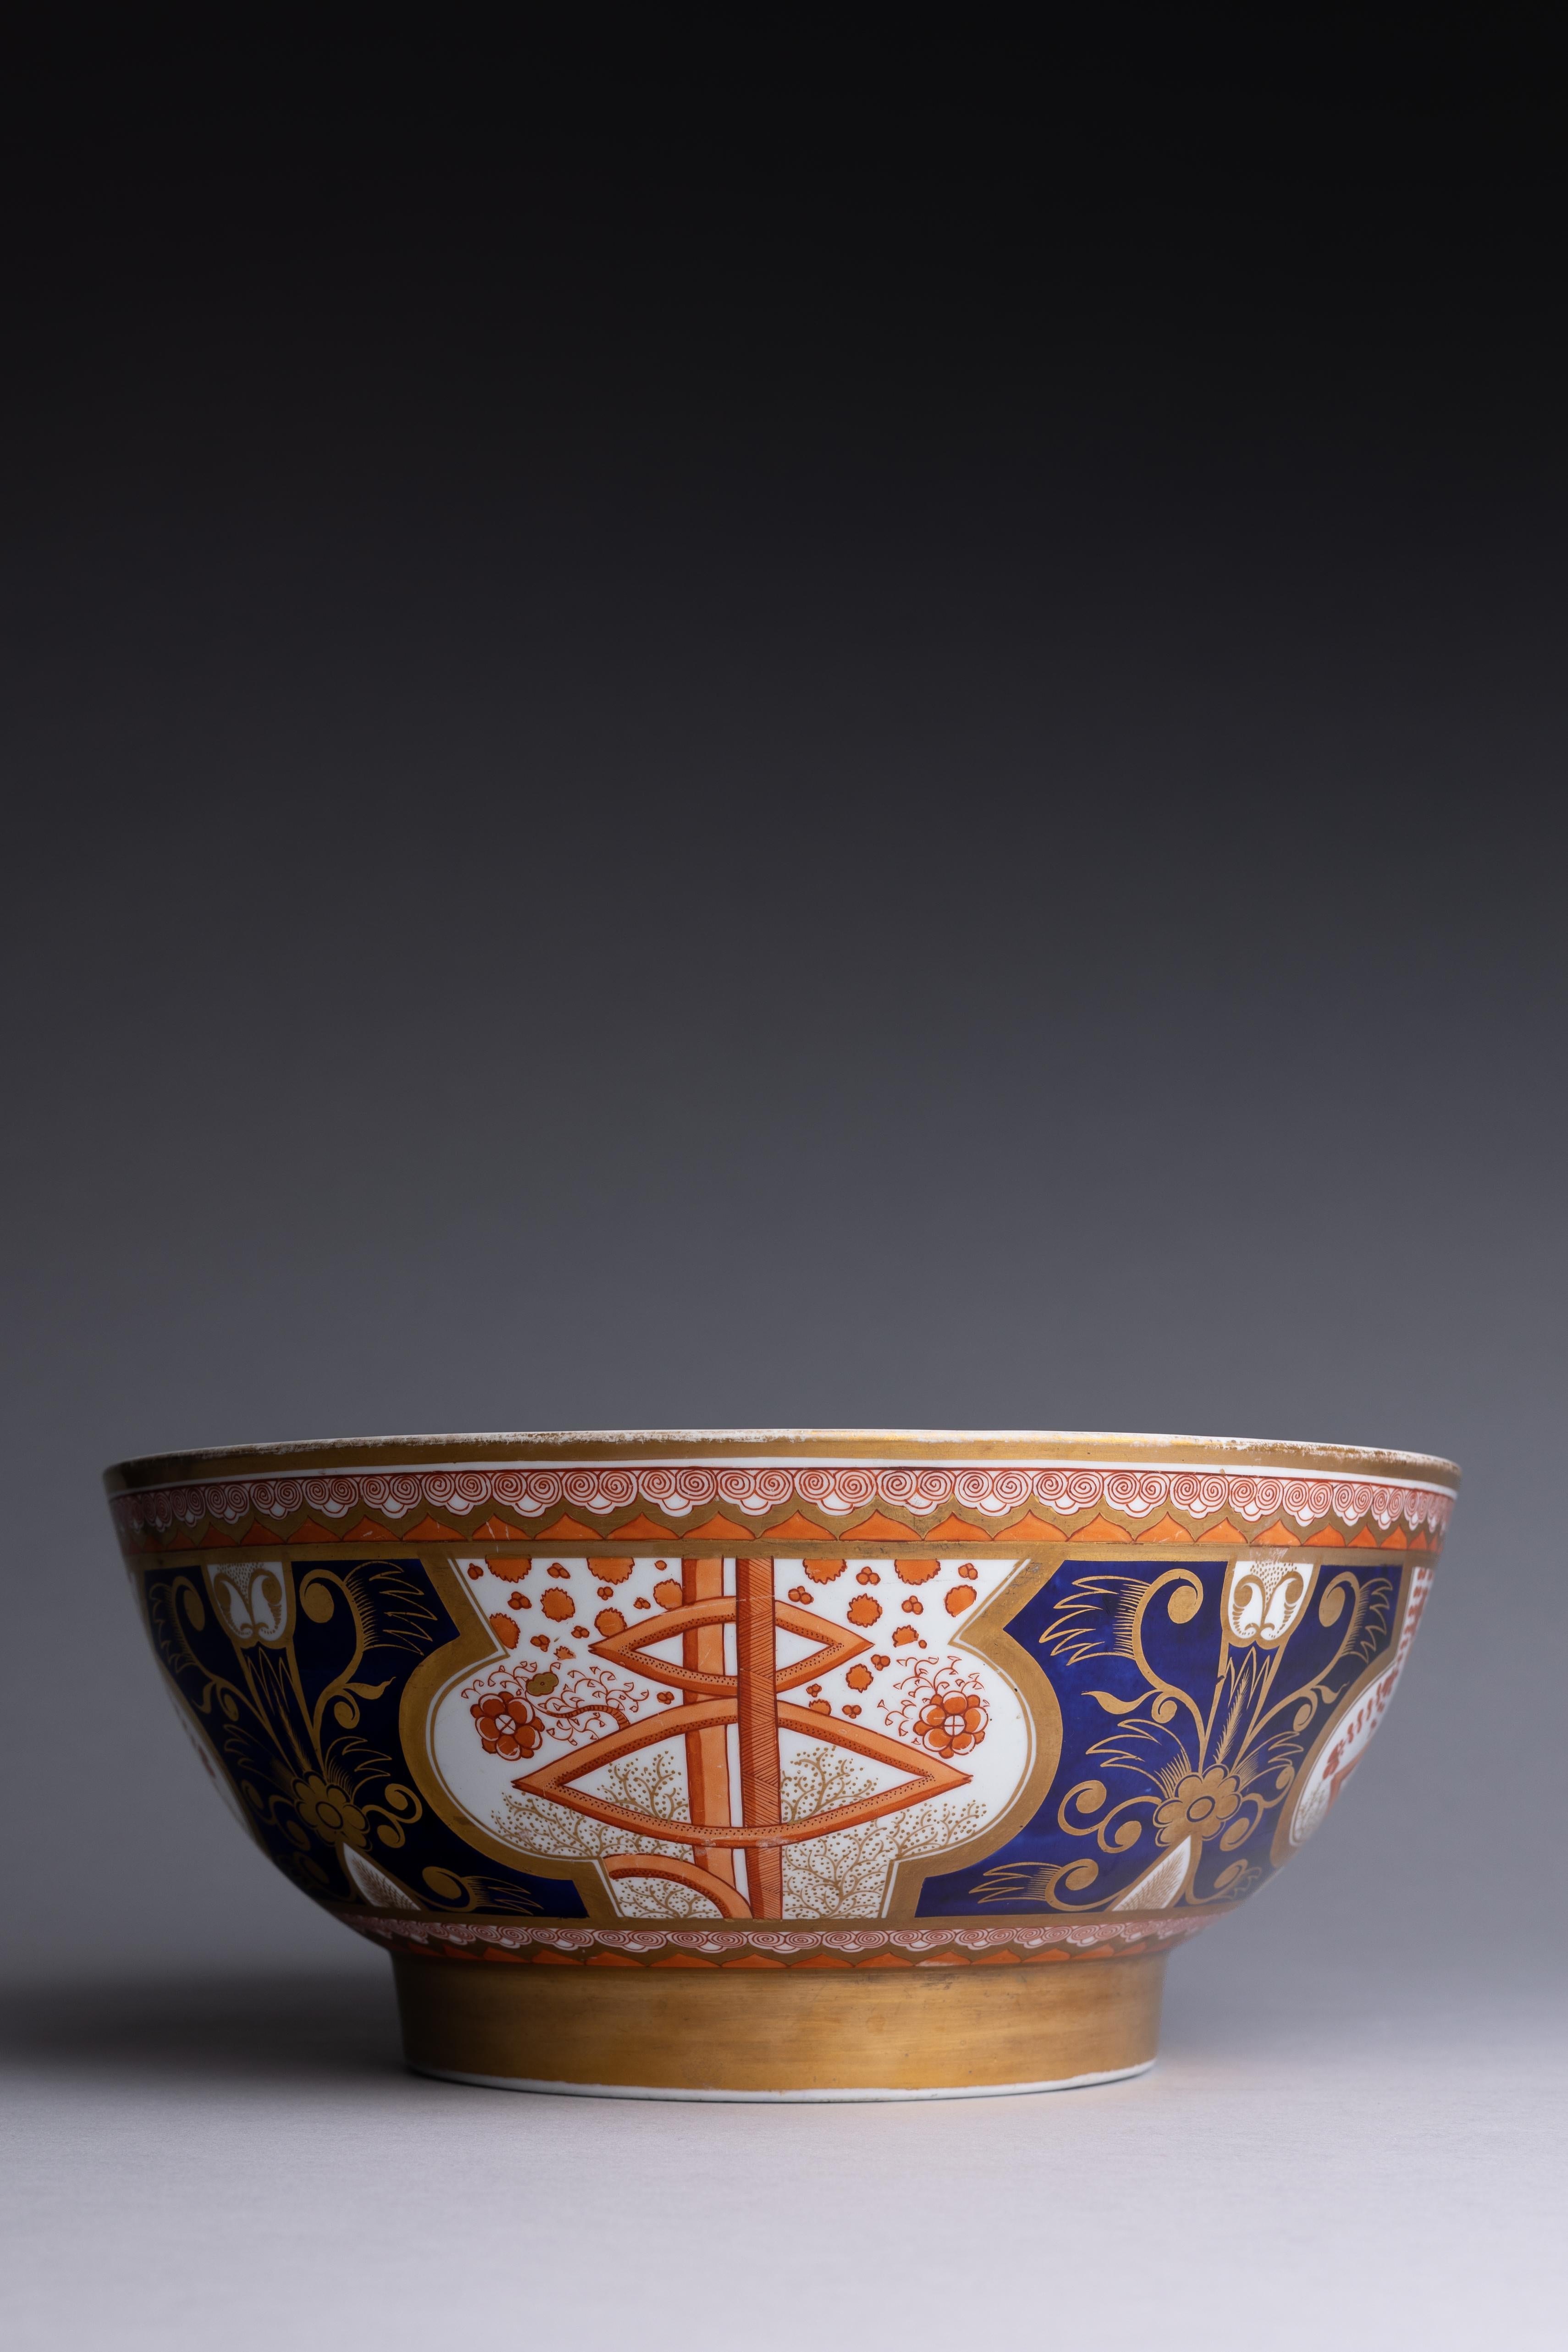 A large Spode Regency porcelain punch bowl in the Dollar pattern, made in England circa 1810.

This punch bowl, designed by English potters after Asian motifs and named for an American currency, presents a fascinating instance of globalization in